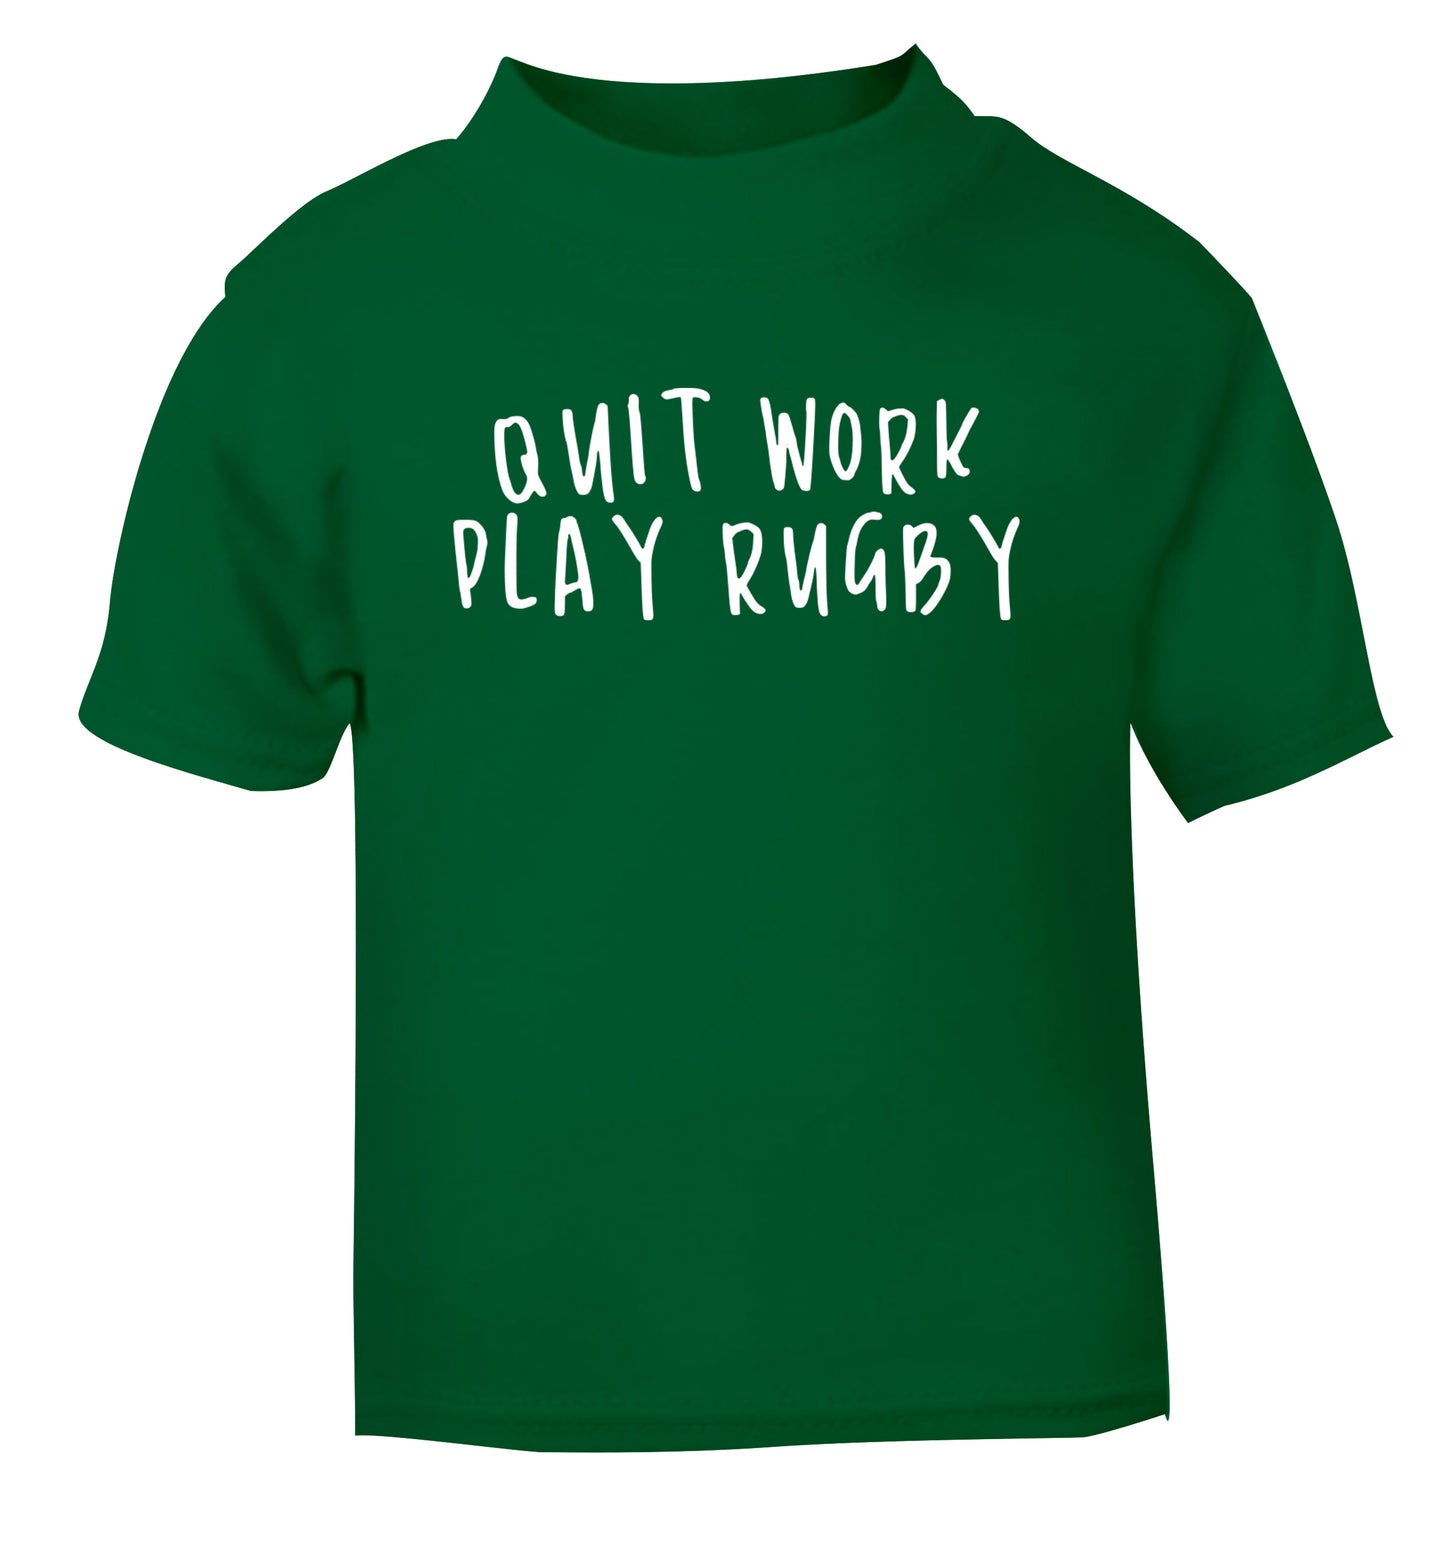 Quit work play rugby green Baby Toddler Tshirt 2 Years